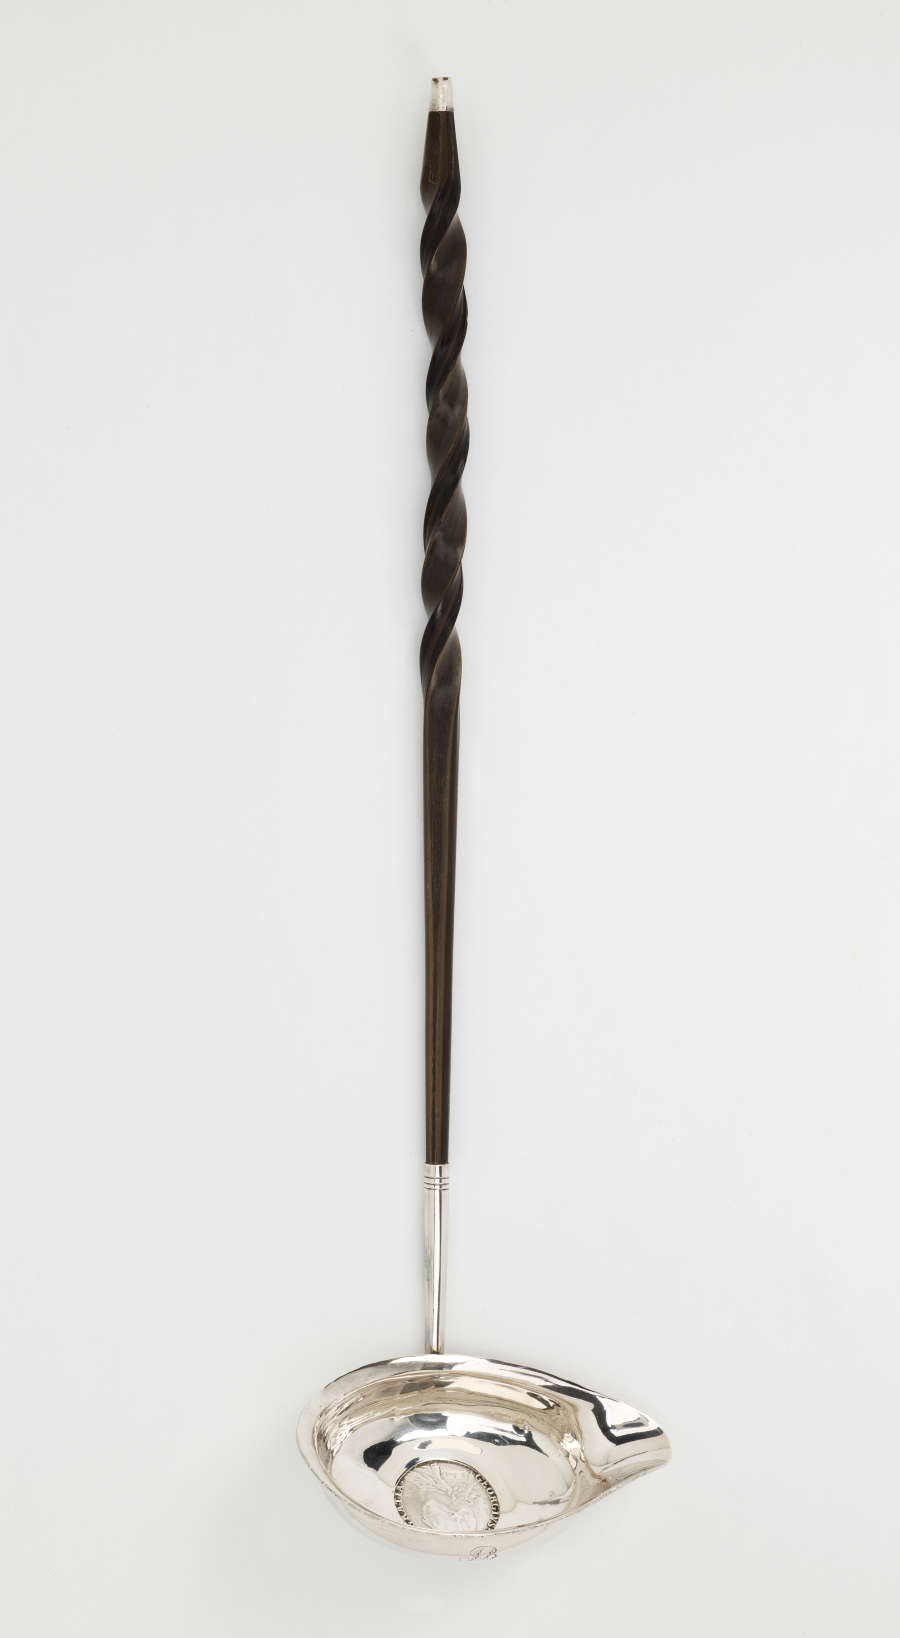 A silver and baleen coin ladle. The handle is twisted and dark and the ladle is silver with a small coin in the center.